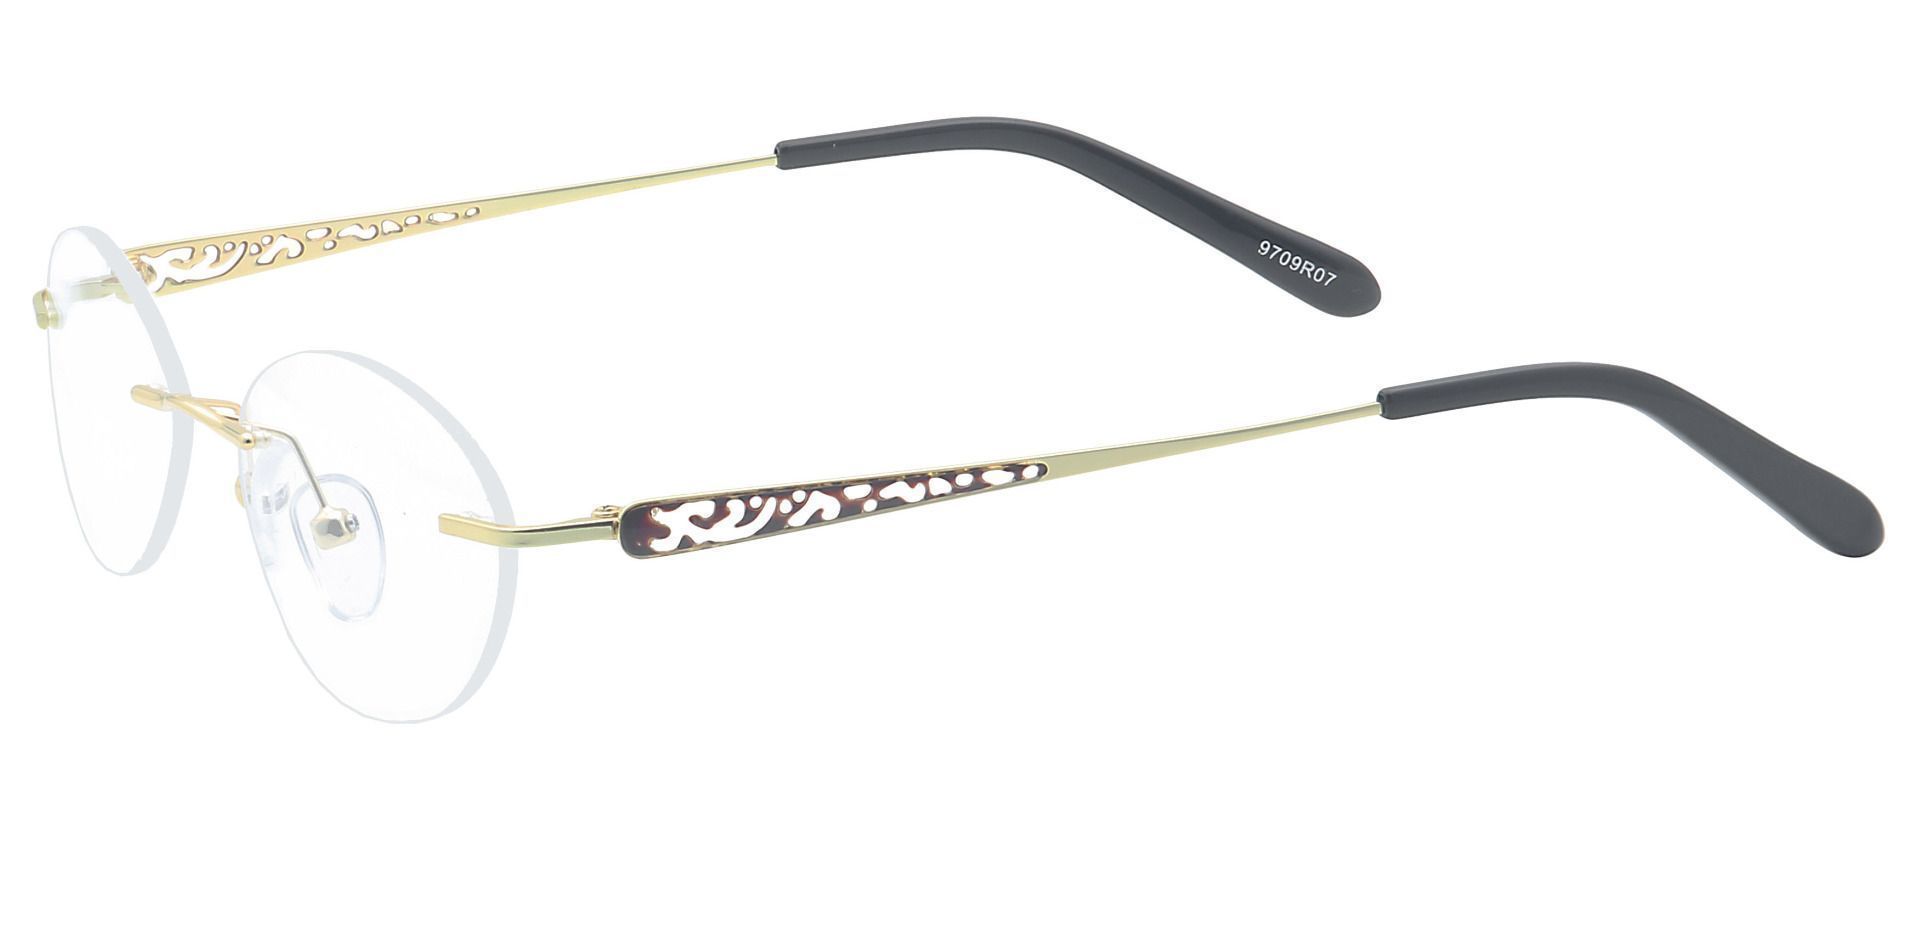 Christina Rimless Reading Glasses - The Frame Is Yellow And Red